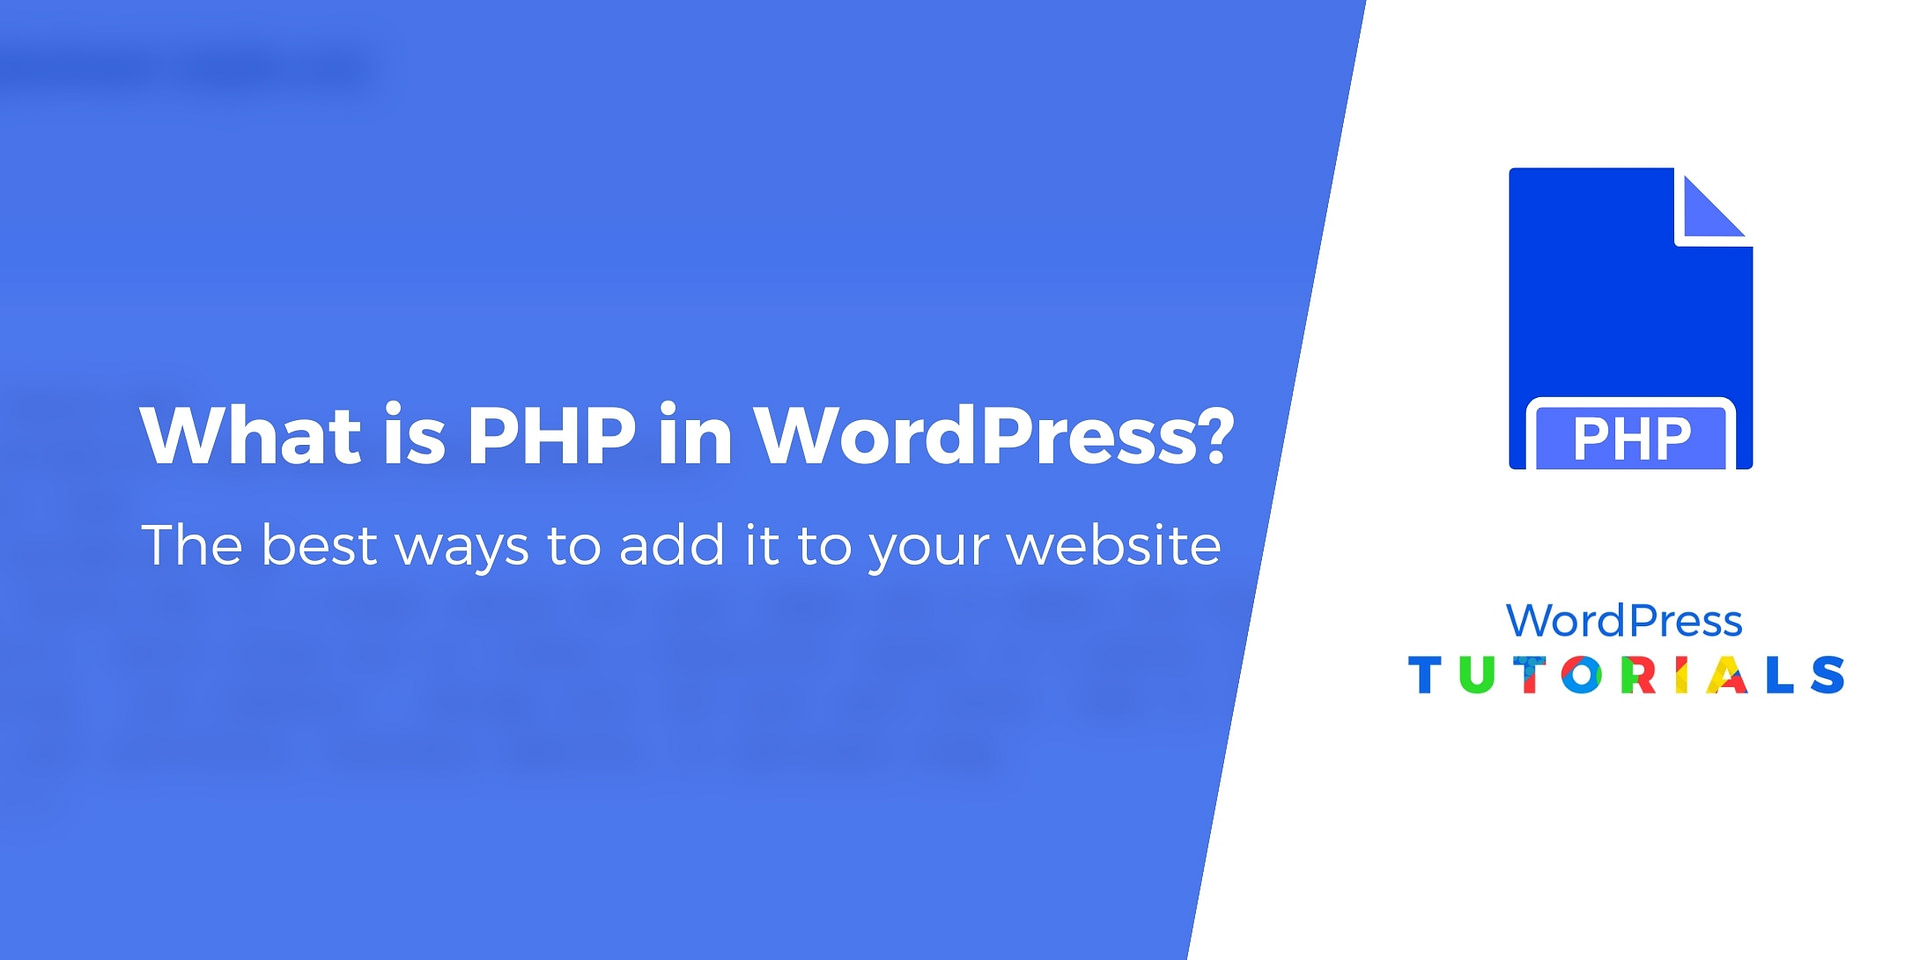 How to Add PHP in WordPress: 4 Easy Methods in 2022